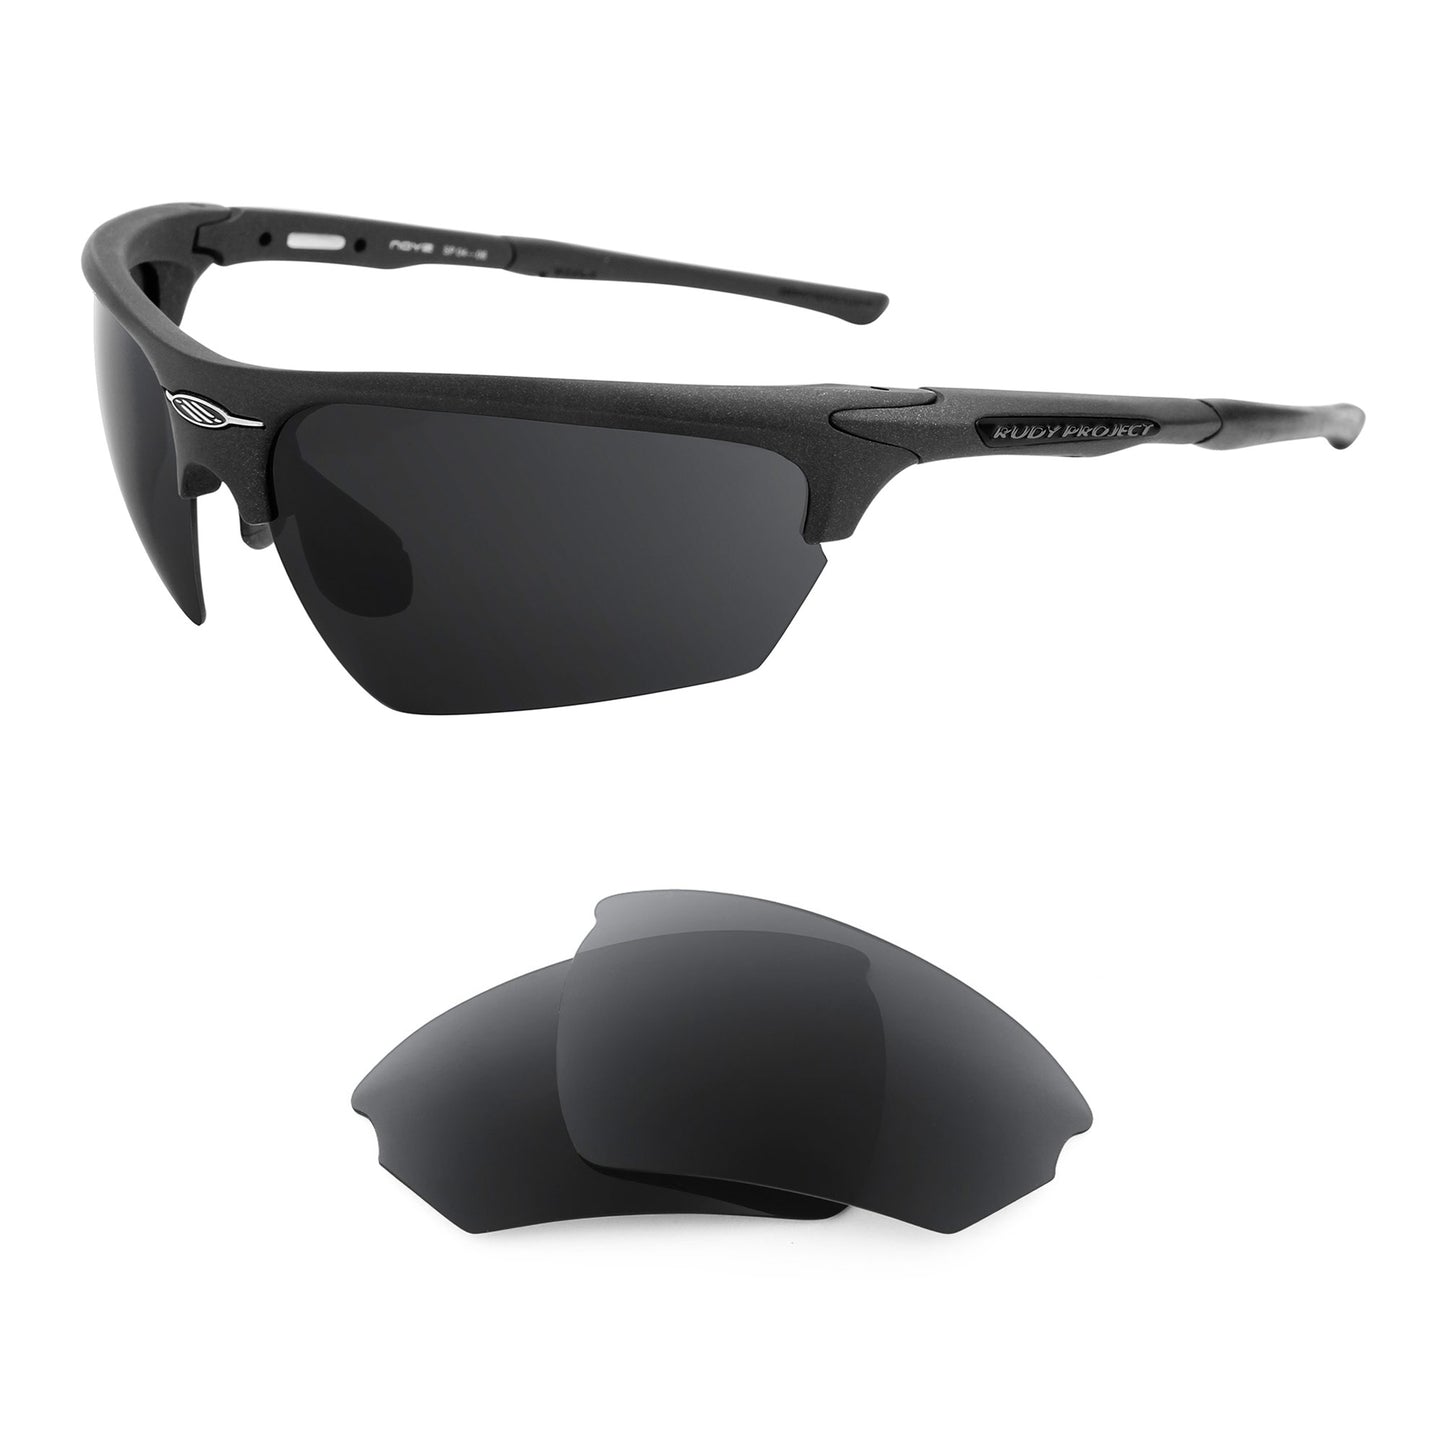 Rudy Project Noyz sunglasses with replacement lenses